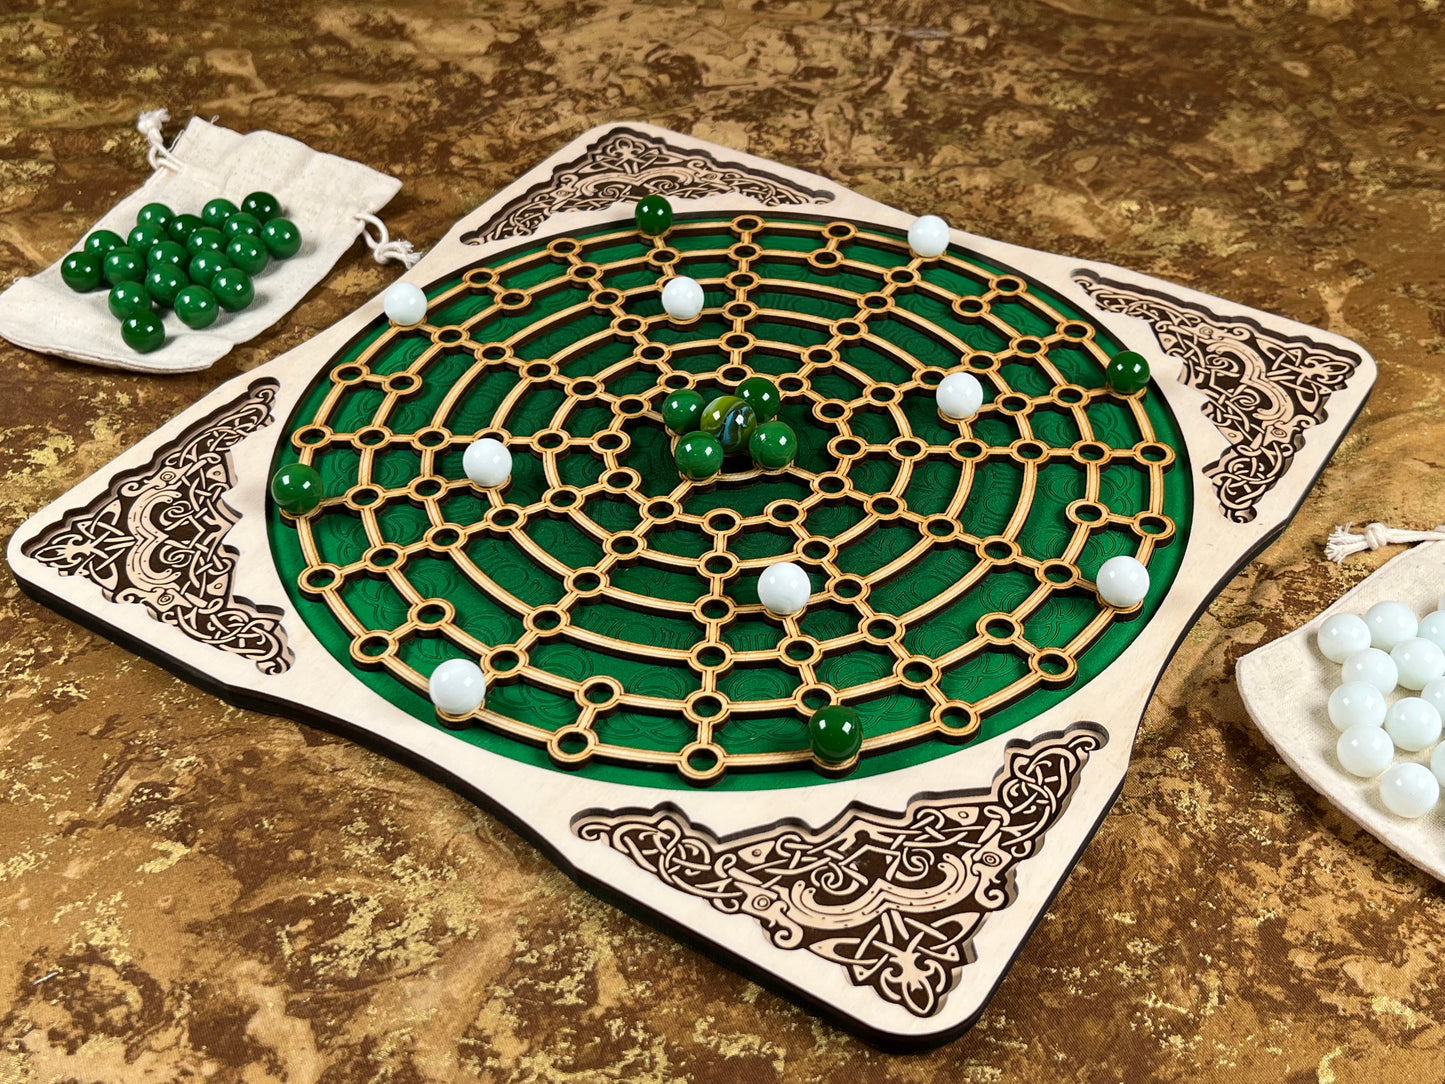 Fidchell ~ An Ancient Celtic Game of Strategy.